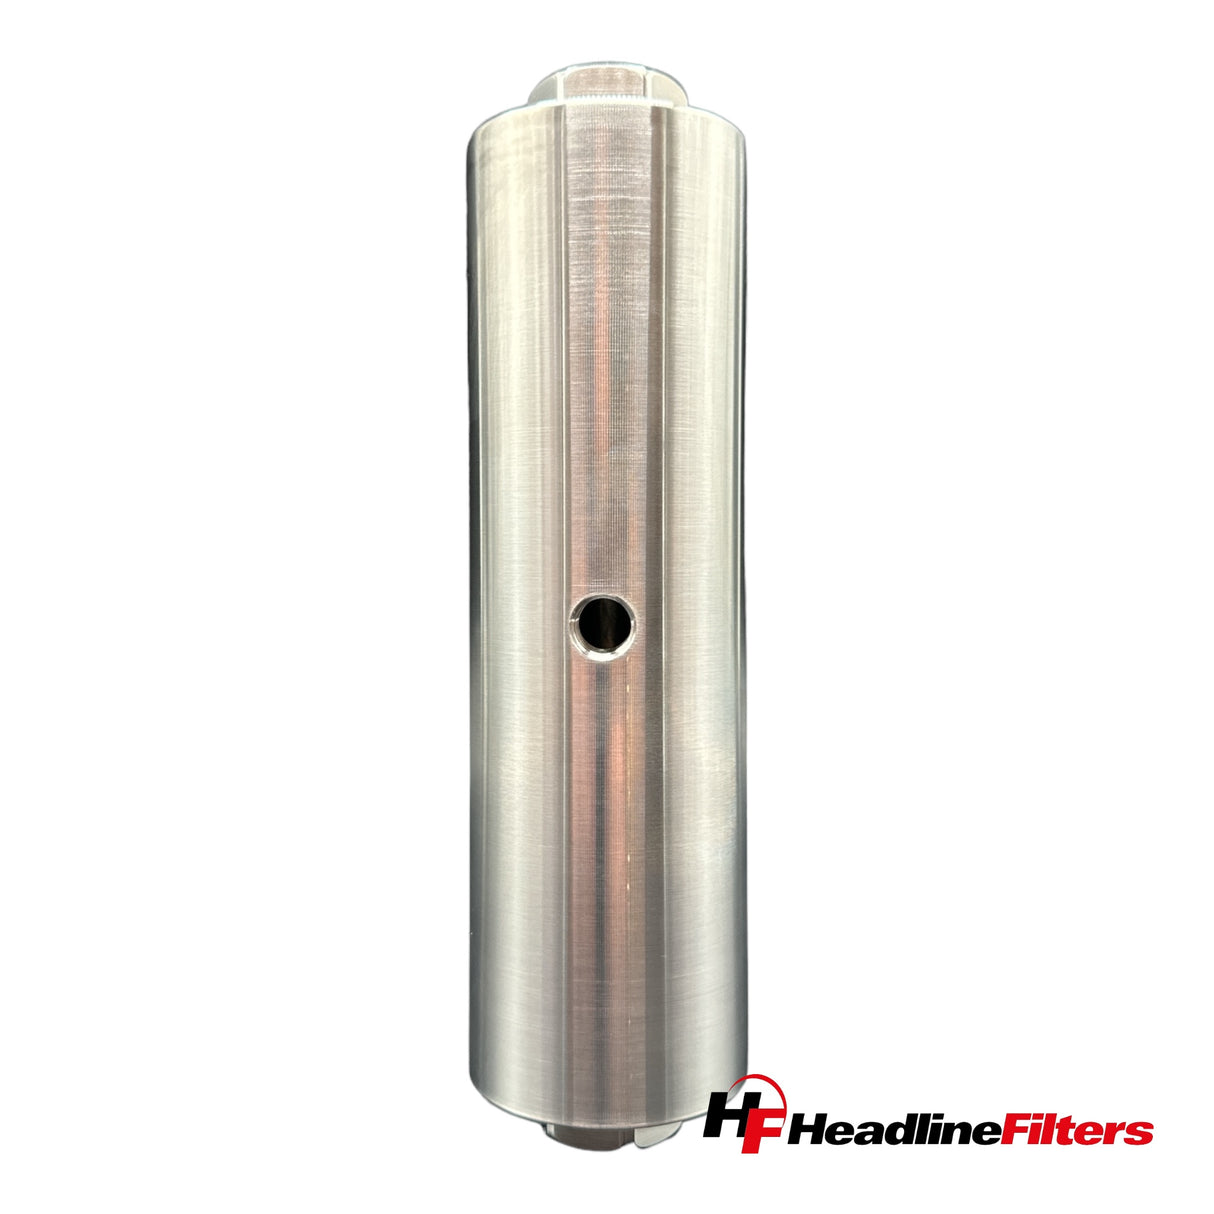 Stainless Steel Filter Housing - Model 146IL-3